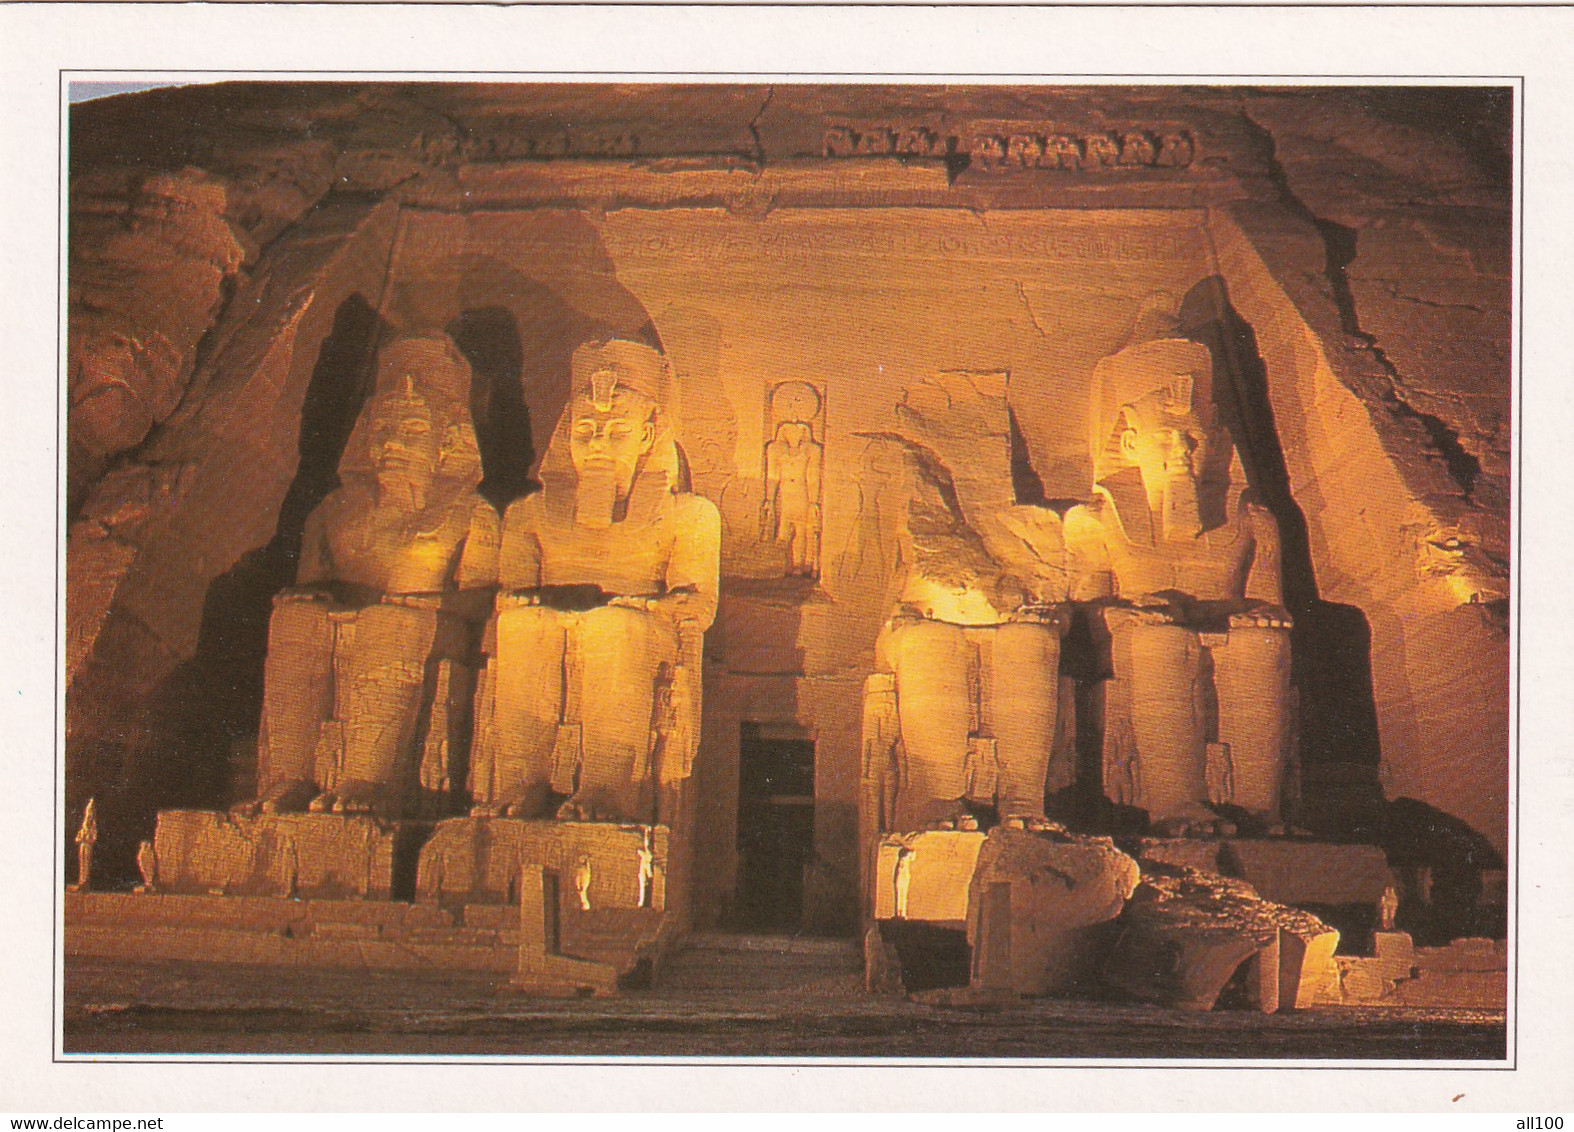 A20160 - ABU SIMBEL TEMPLES EGYPT EGYPTE SUZANNE HELD - Temples D'Abou Simbel